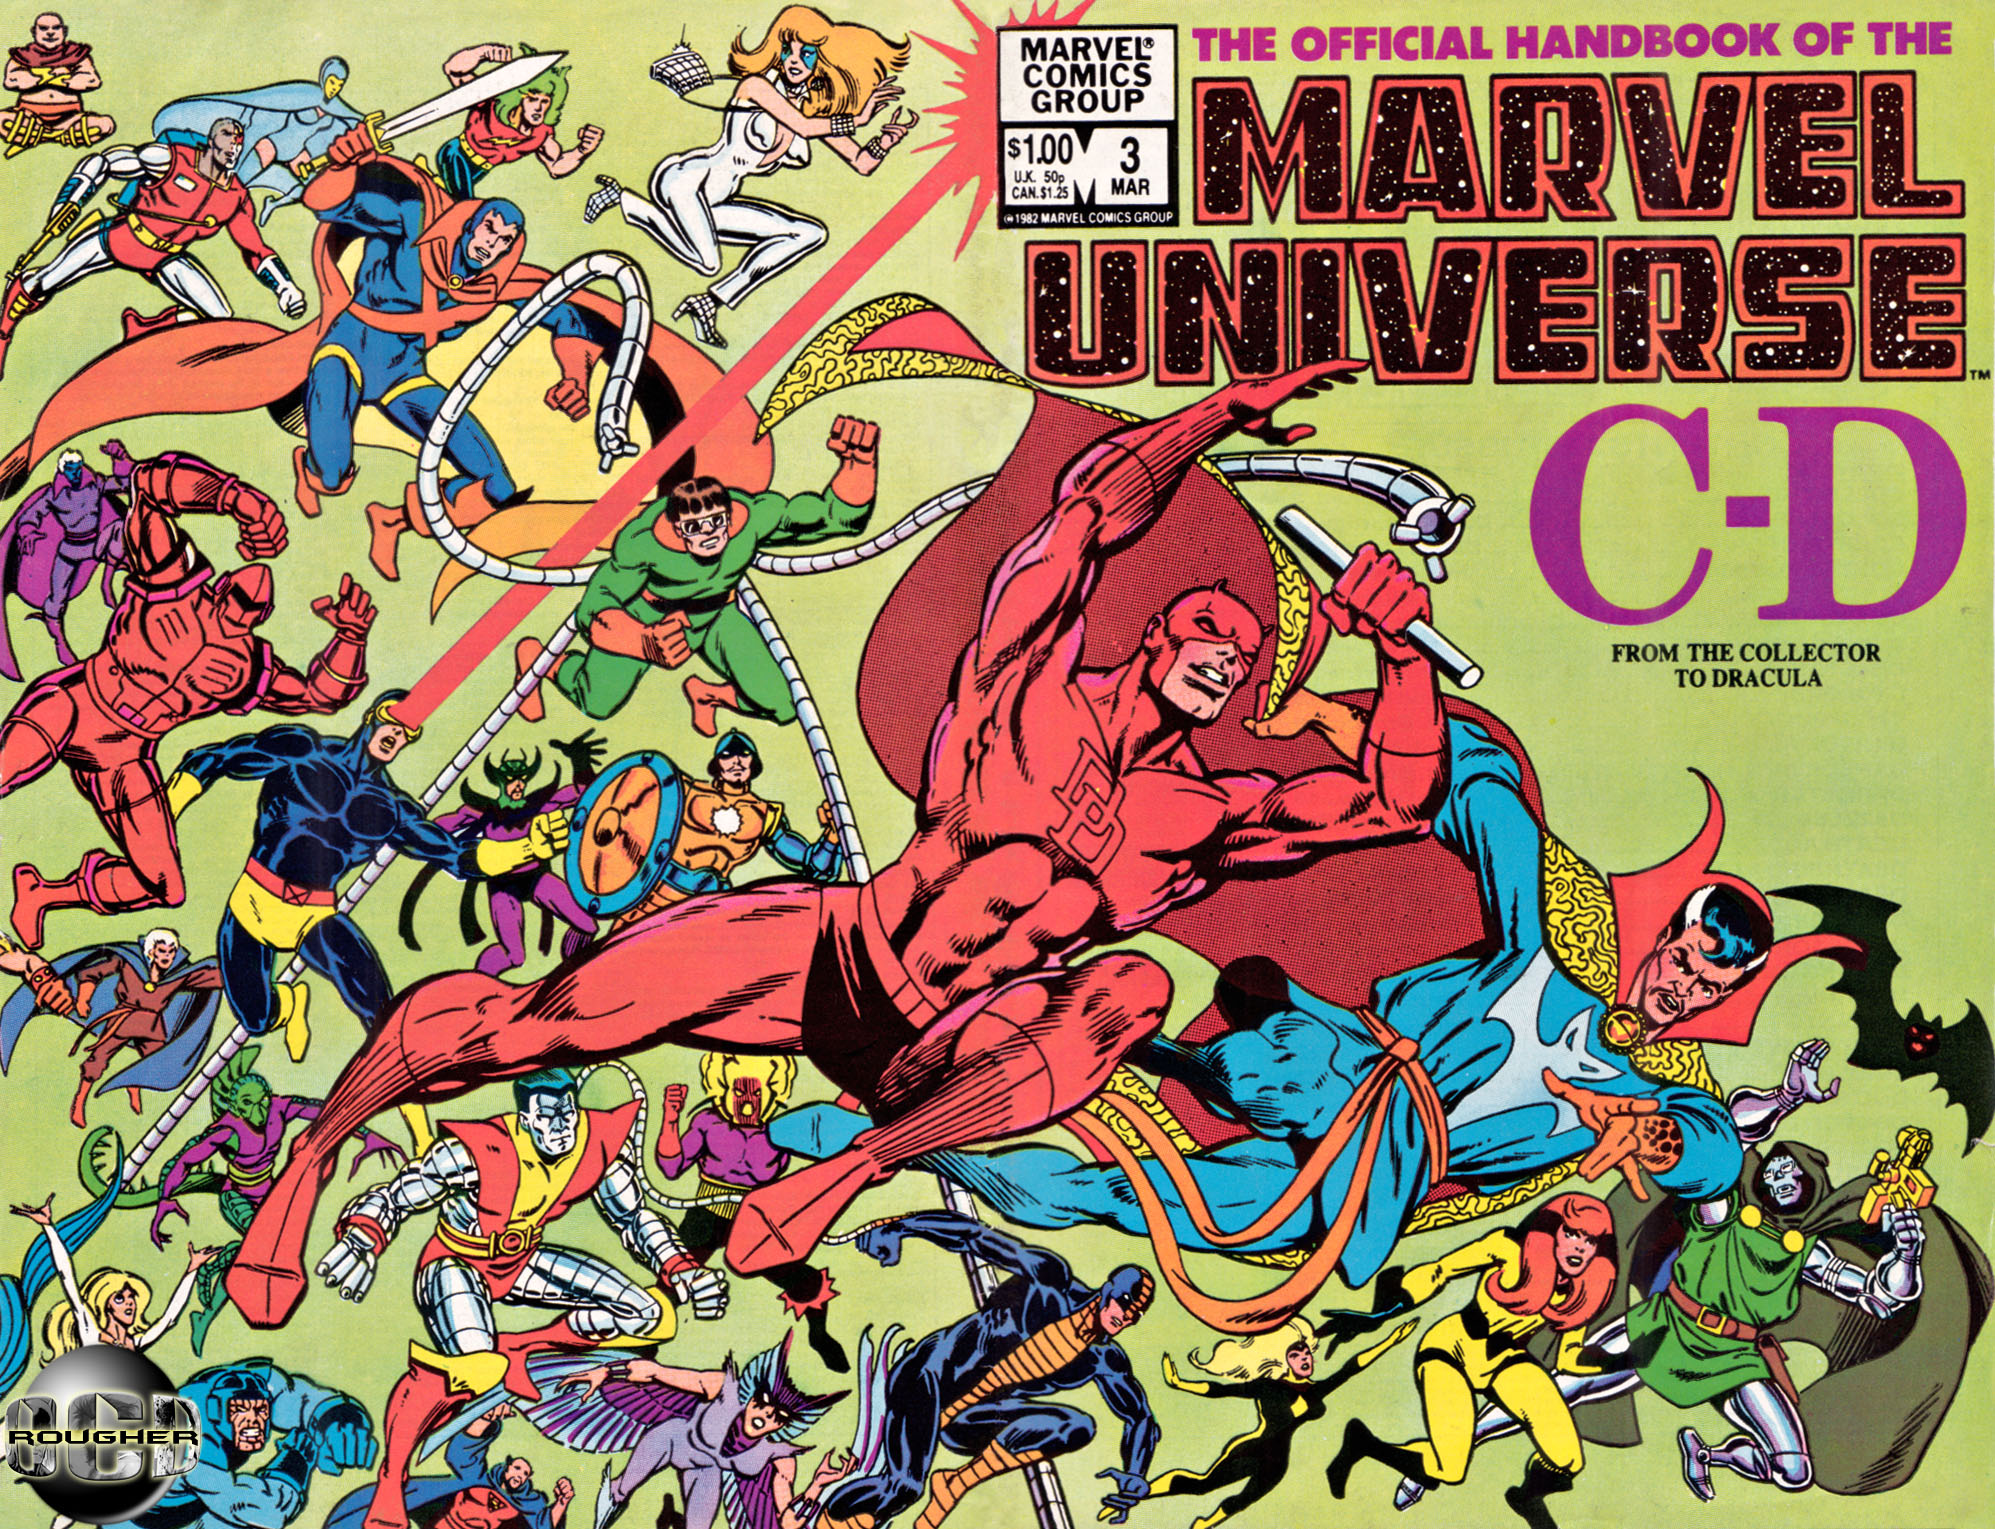 Read online The Official Handbook of the Marvel Universe comic -  Issue #3 - 1